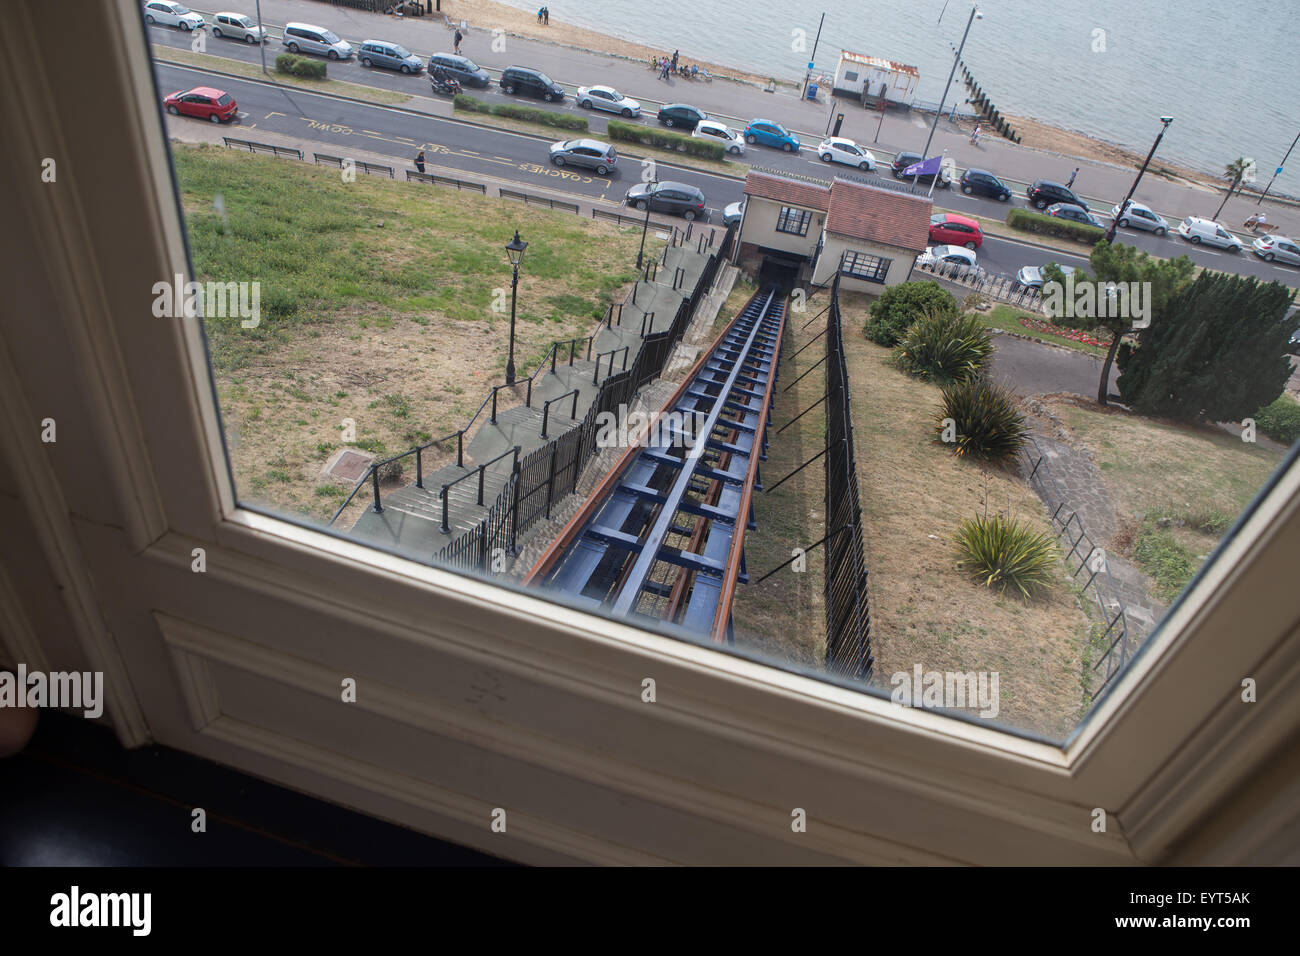 View from Southend Cliff Lift, a funicular by the seaside at Southend-on-Sea, Essex, England. It was built in 1912. Stock Photo